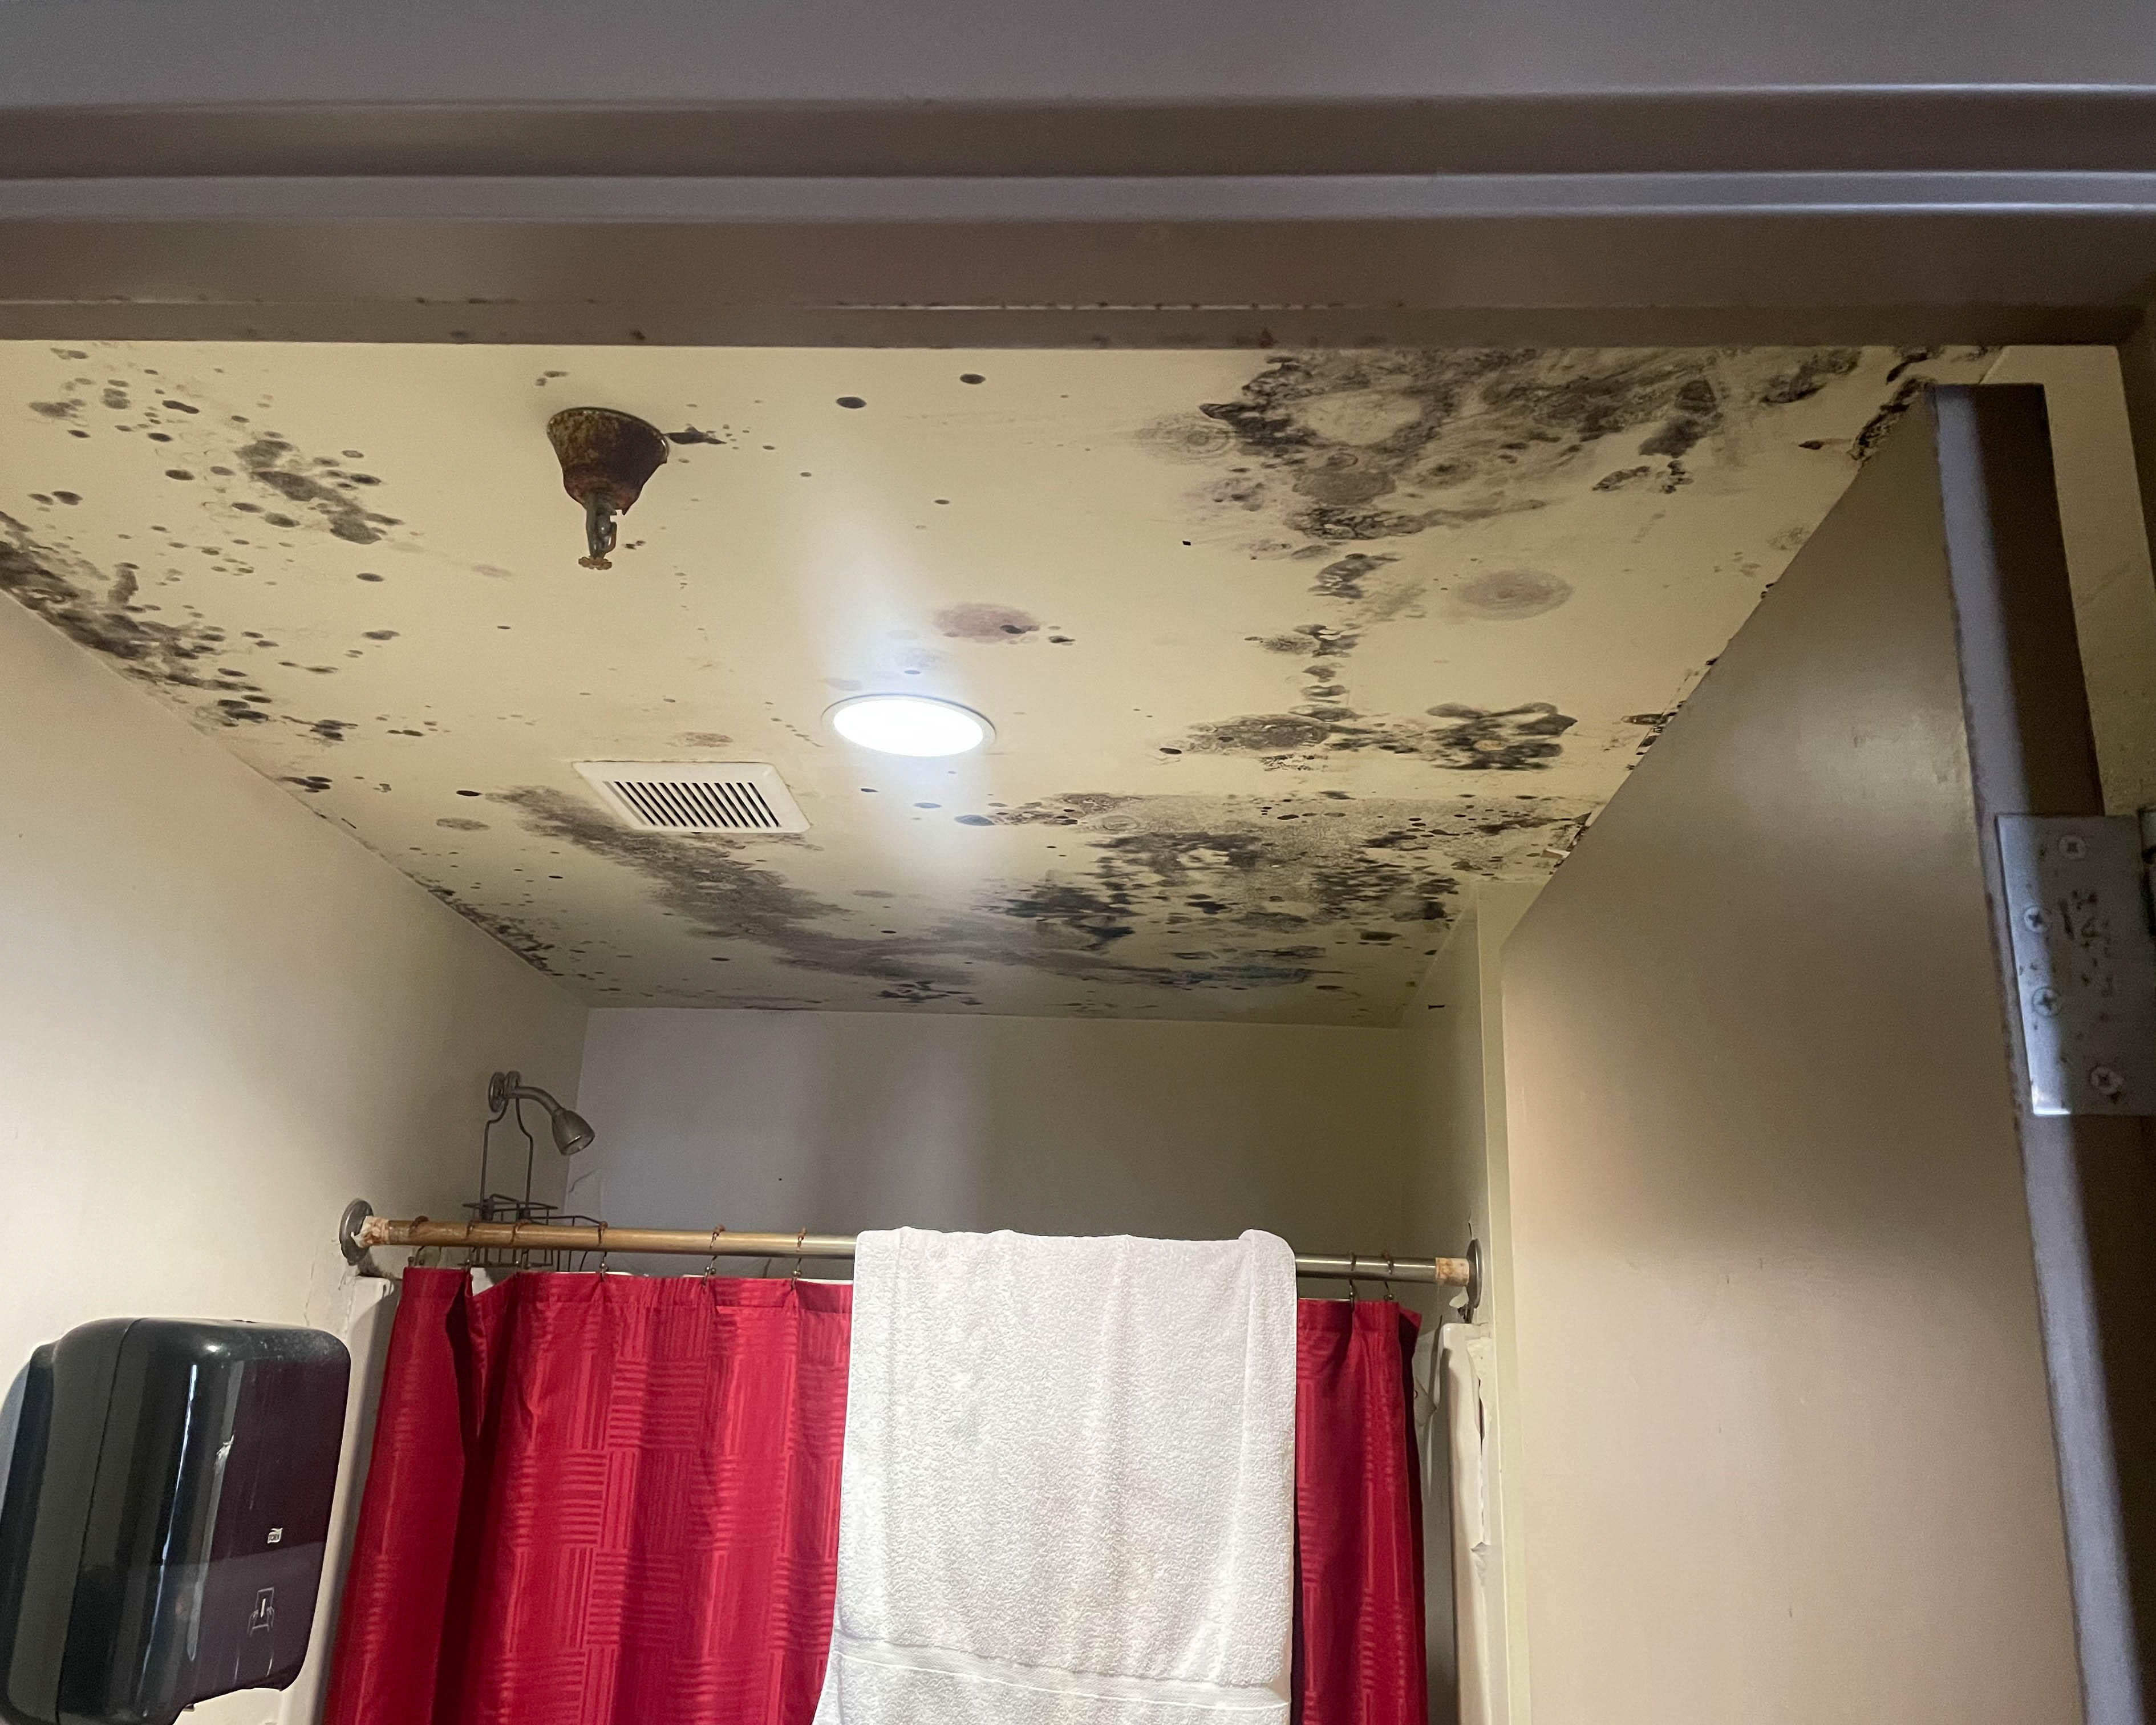 Mold can grow quickly. SERVPRO of Oak Ridge can immediately respond to your mold damage in Oak Ridge, TN by cleaning properly the affected area. The technicians are trained with the professional equipment for your mold remediation emergency. We are open 365 days a year!